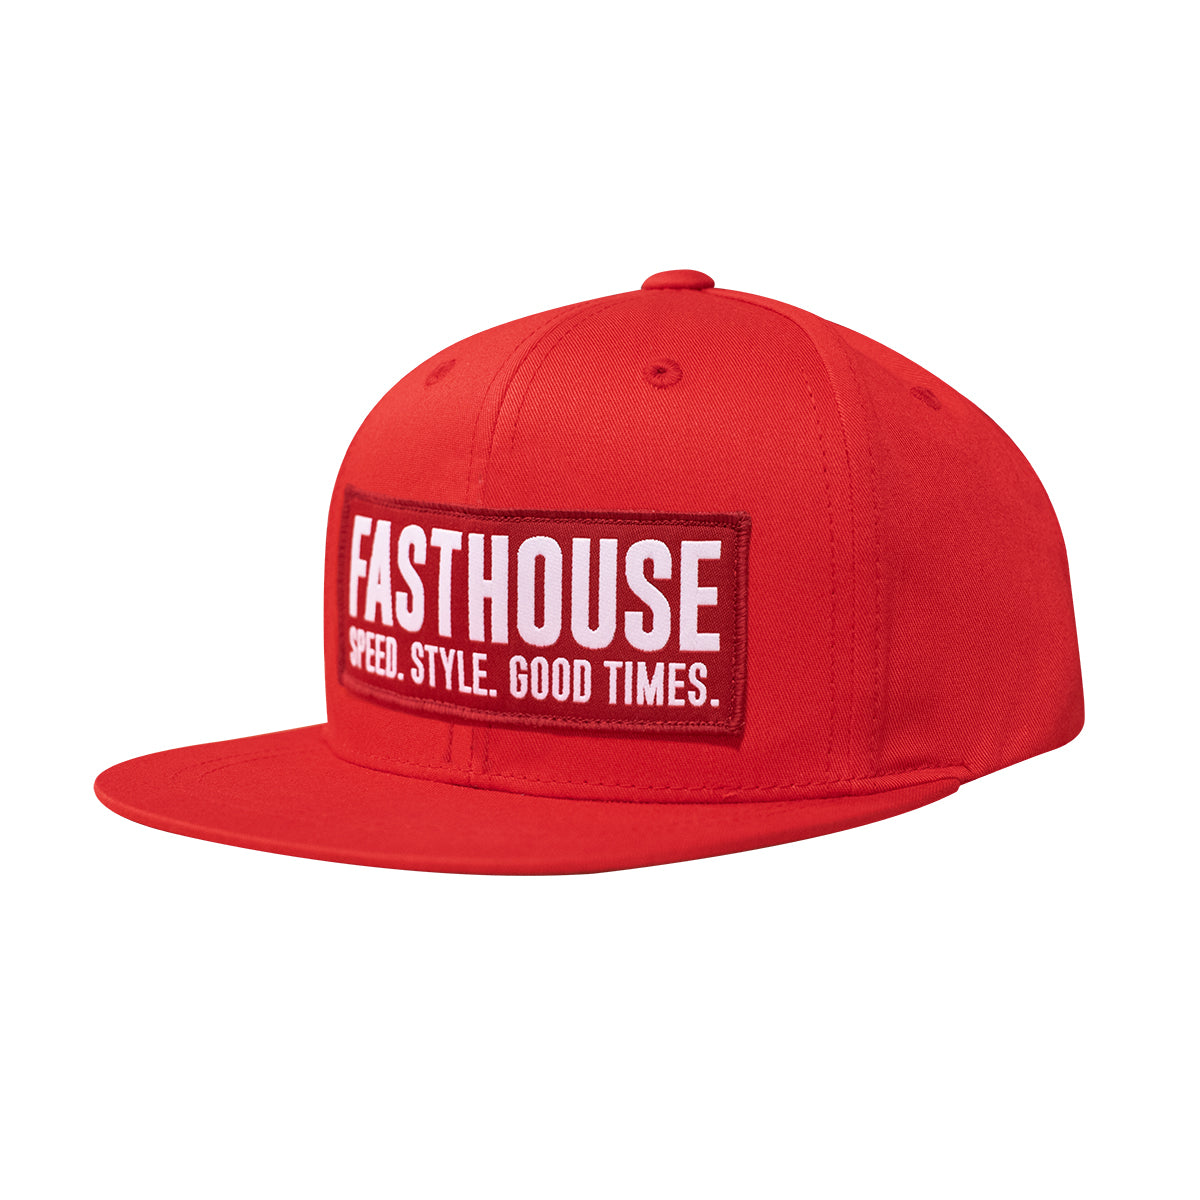 Fasthouse - Blockhouse Youth Hat - Red